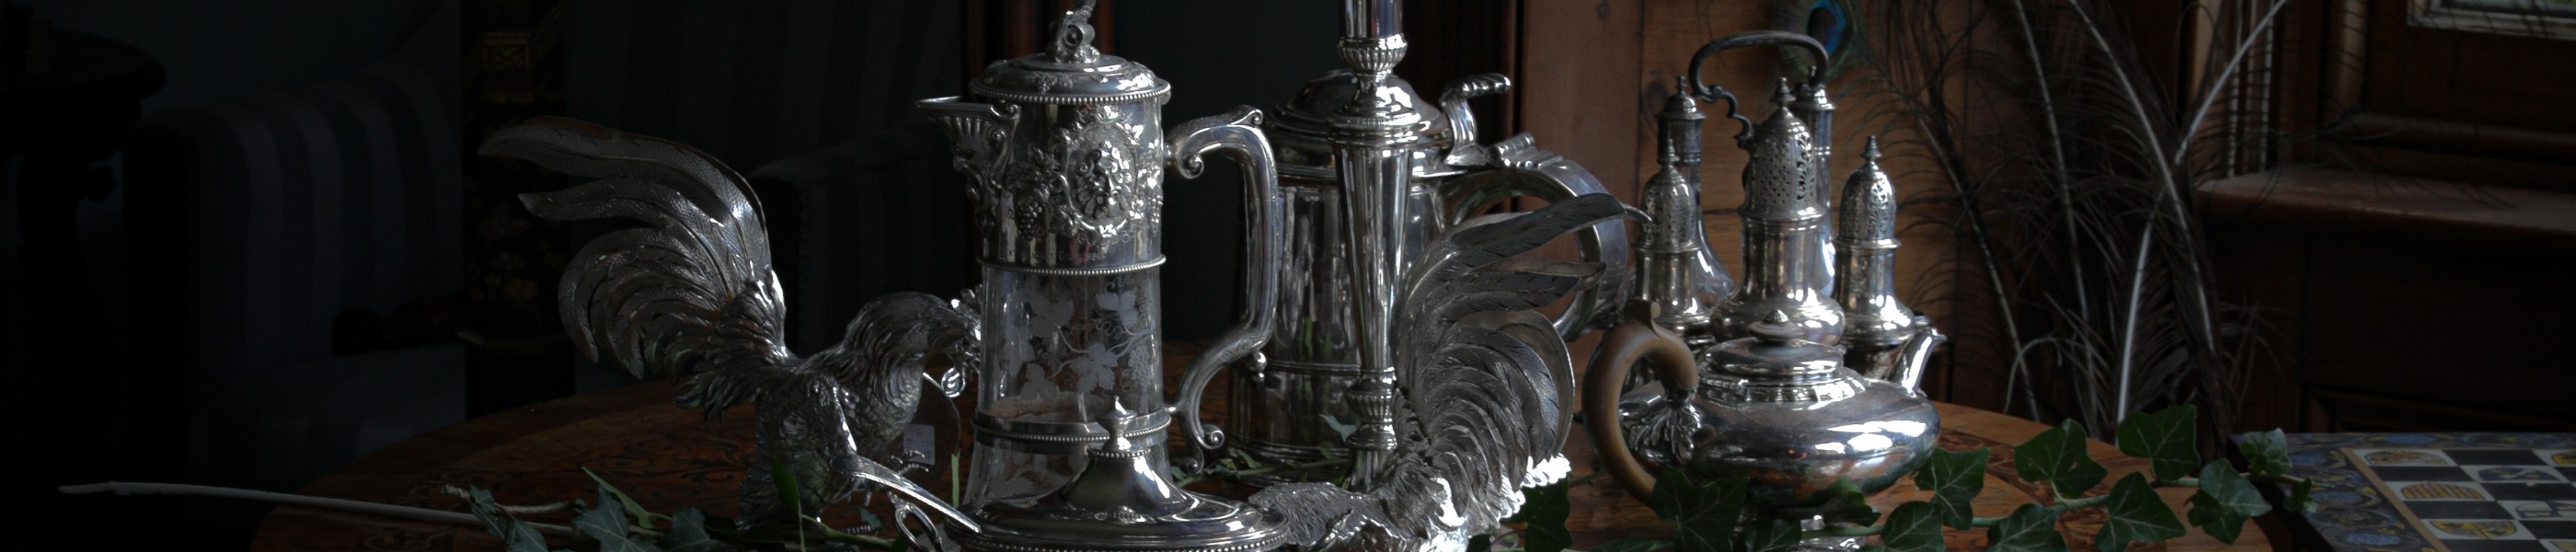 Chorleys silver and object of vertu auctions regular sales fine craftsmanship and historic objects